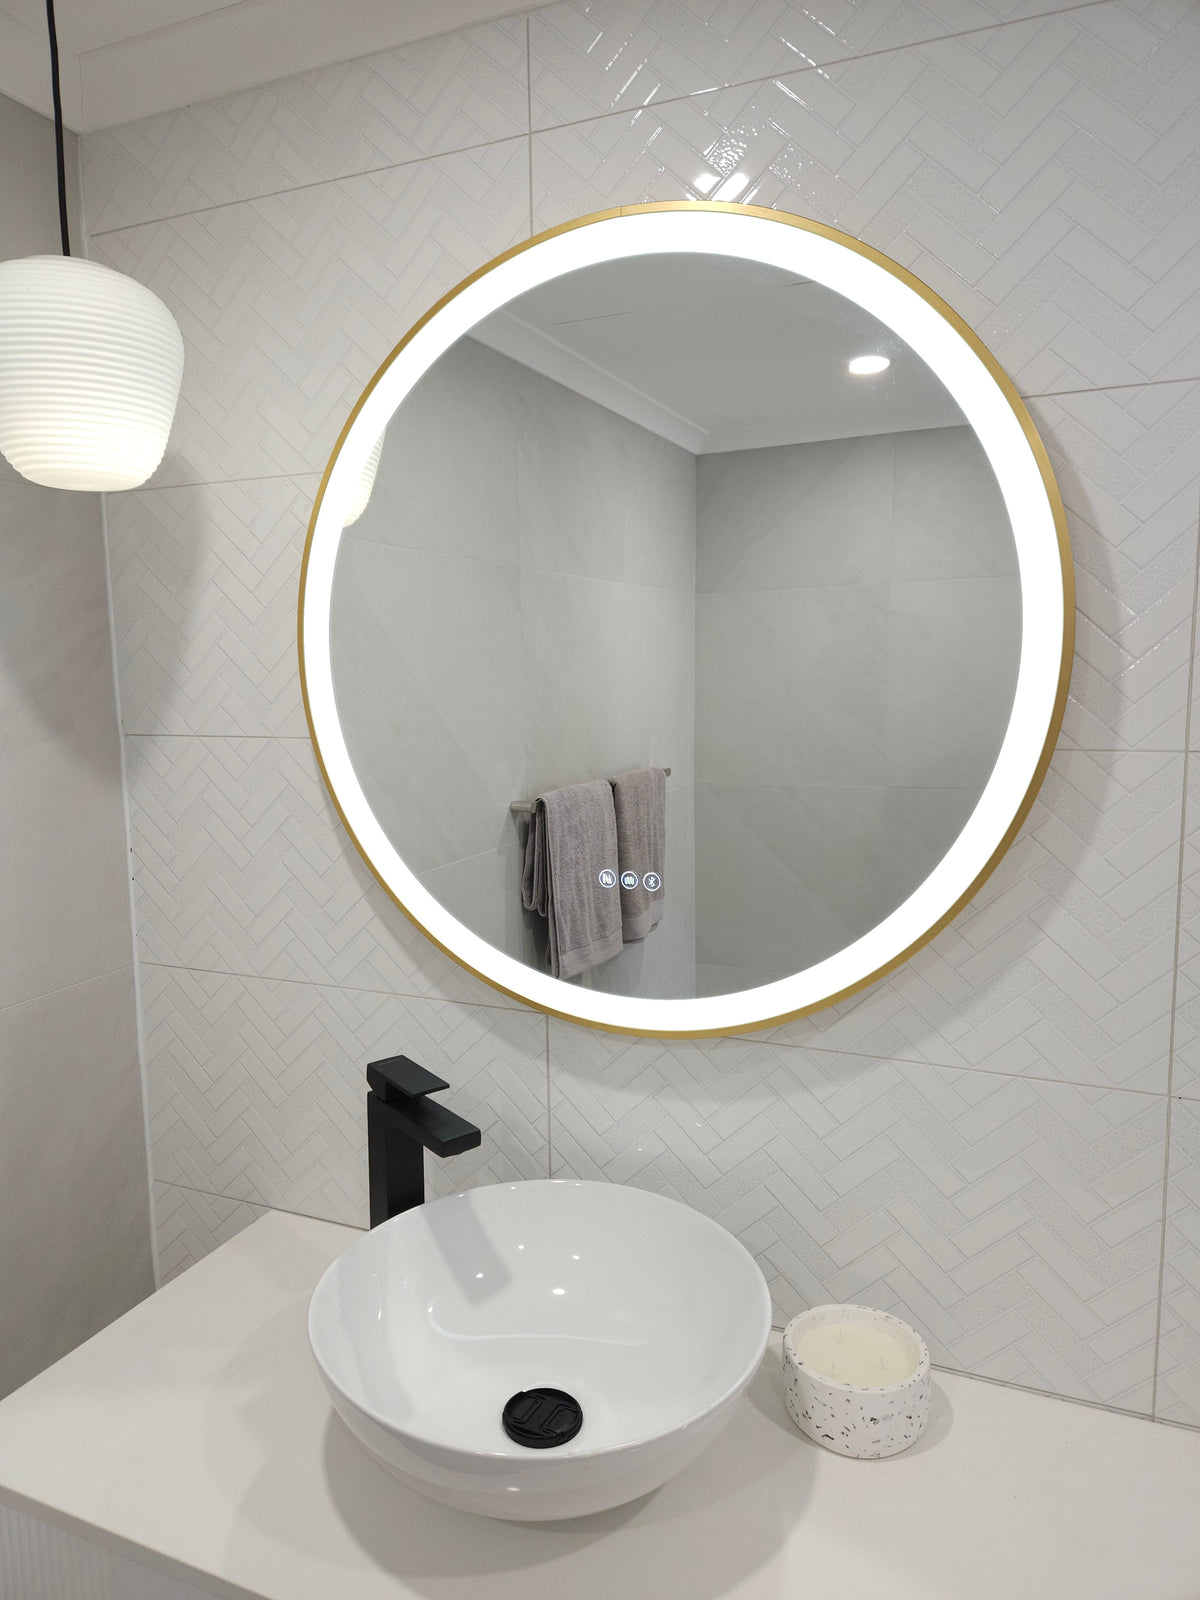 Circle-Shaped Smart LED Mirror in white-themed powder room with white sink, black faucet, hanging light & cabinet.